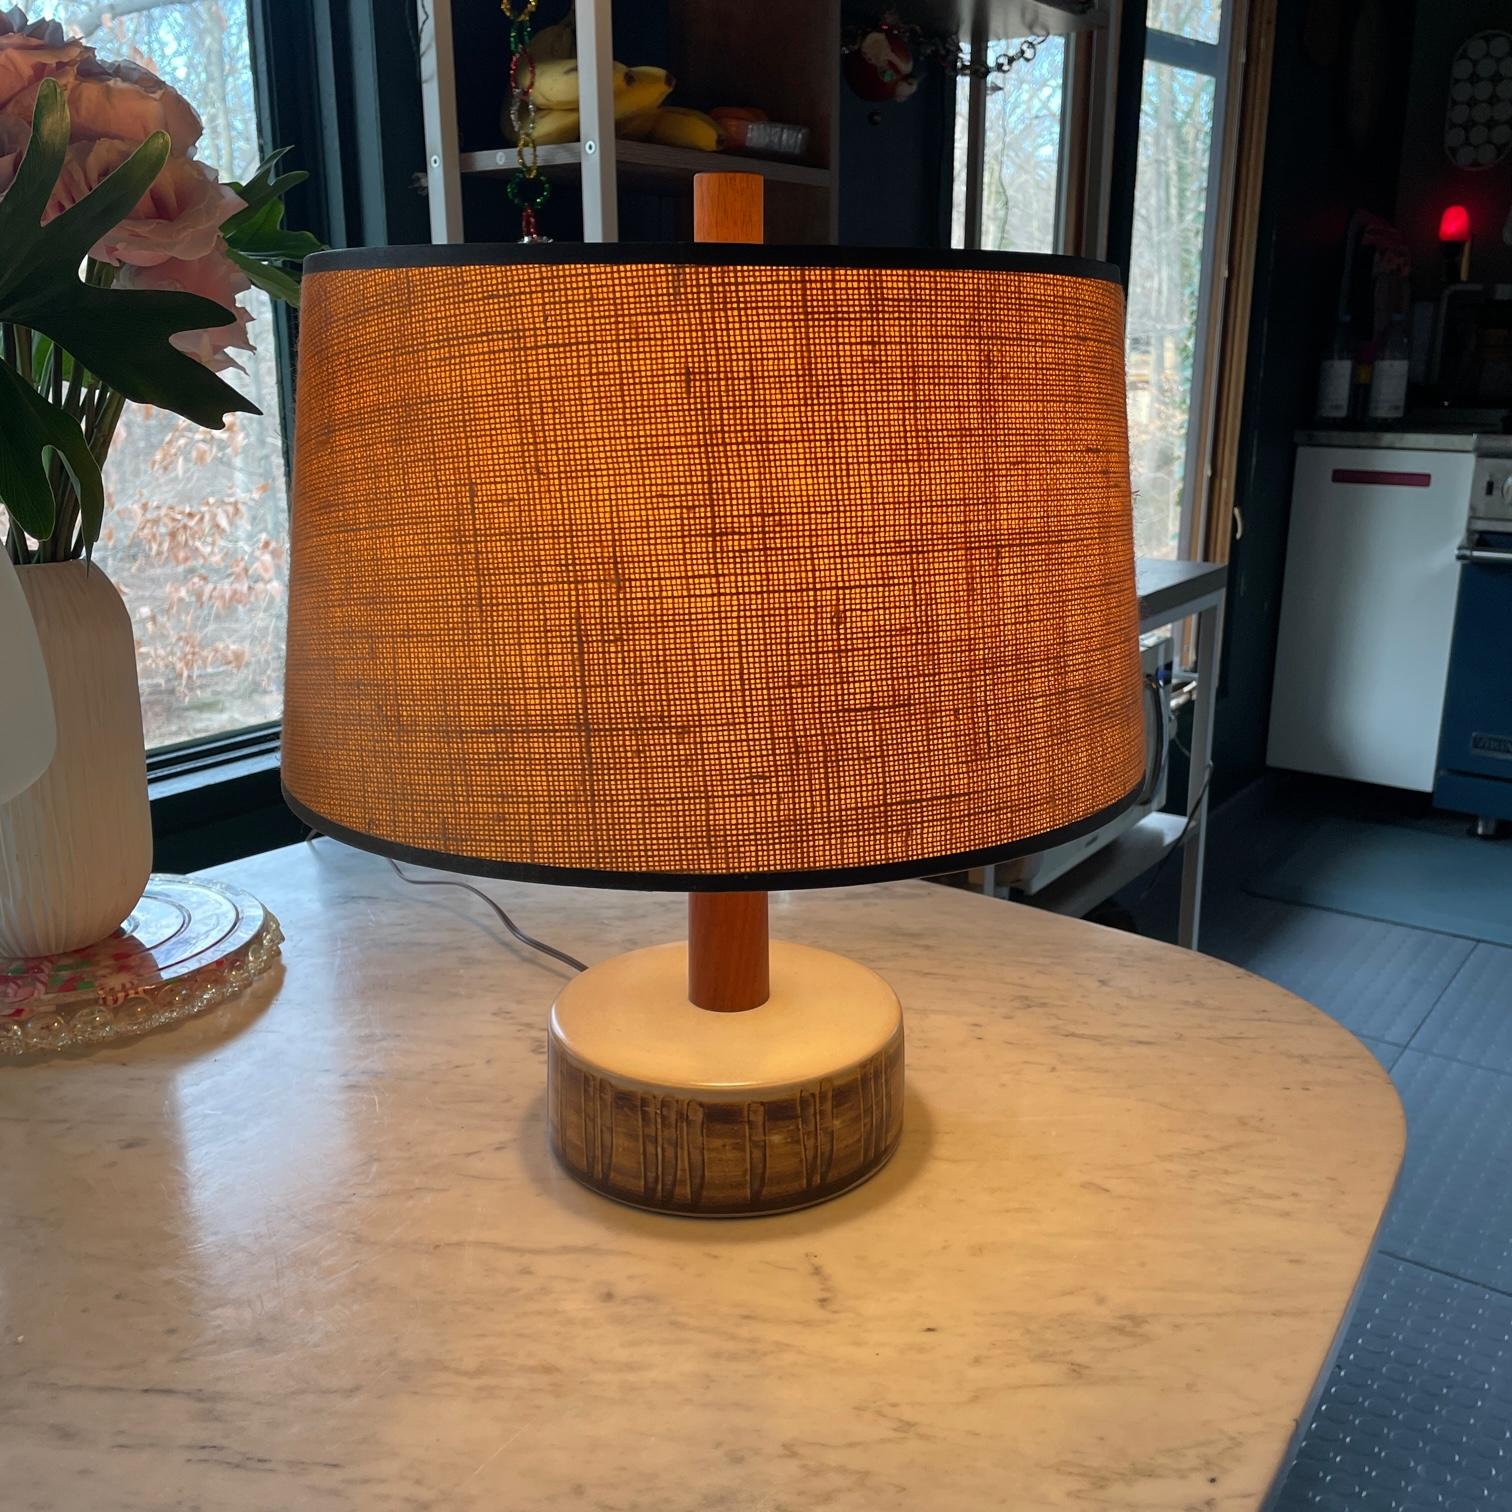 Uncommon form. Lamp body is undamaged, the older lampshade is not original and slightly dingy.  The lamp socket also retains the Marshall Studios paper label.

Dia 18.5 x H 14 .5 in.